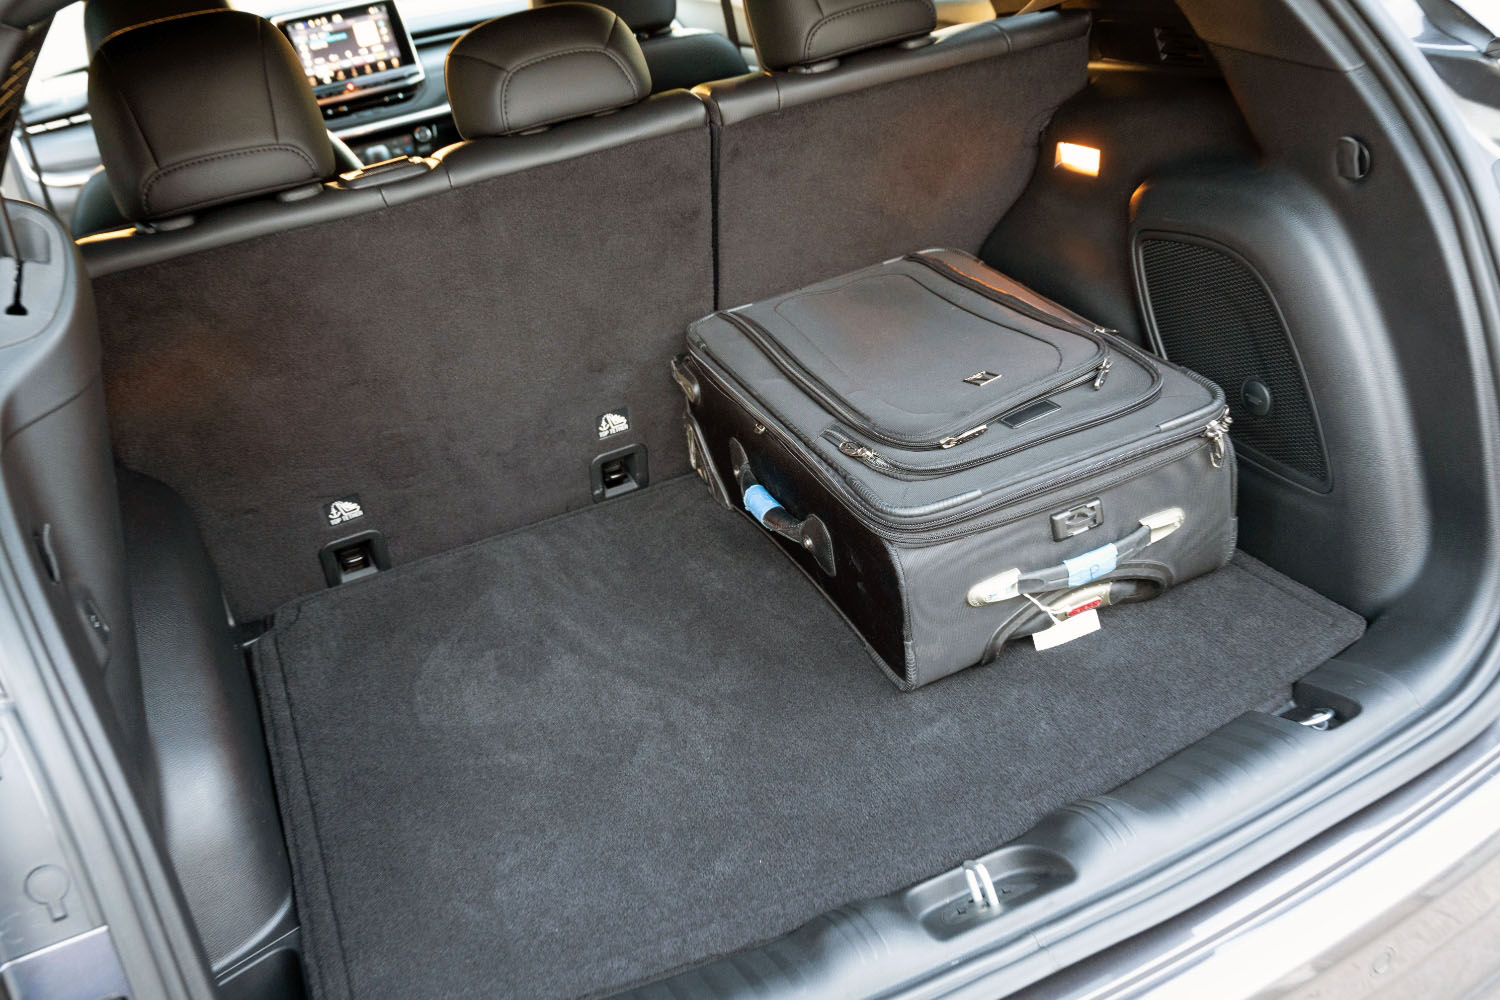 2022 Jeep Compass Rear Cargo Space